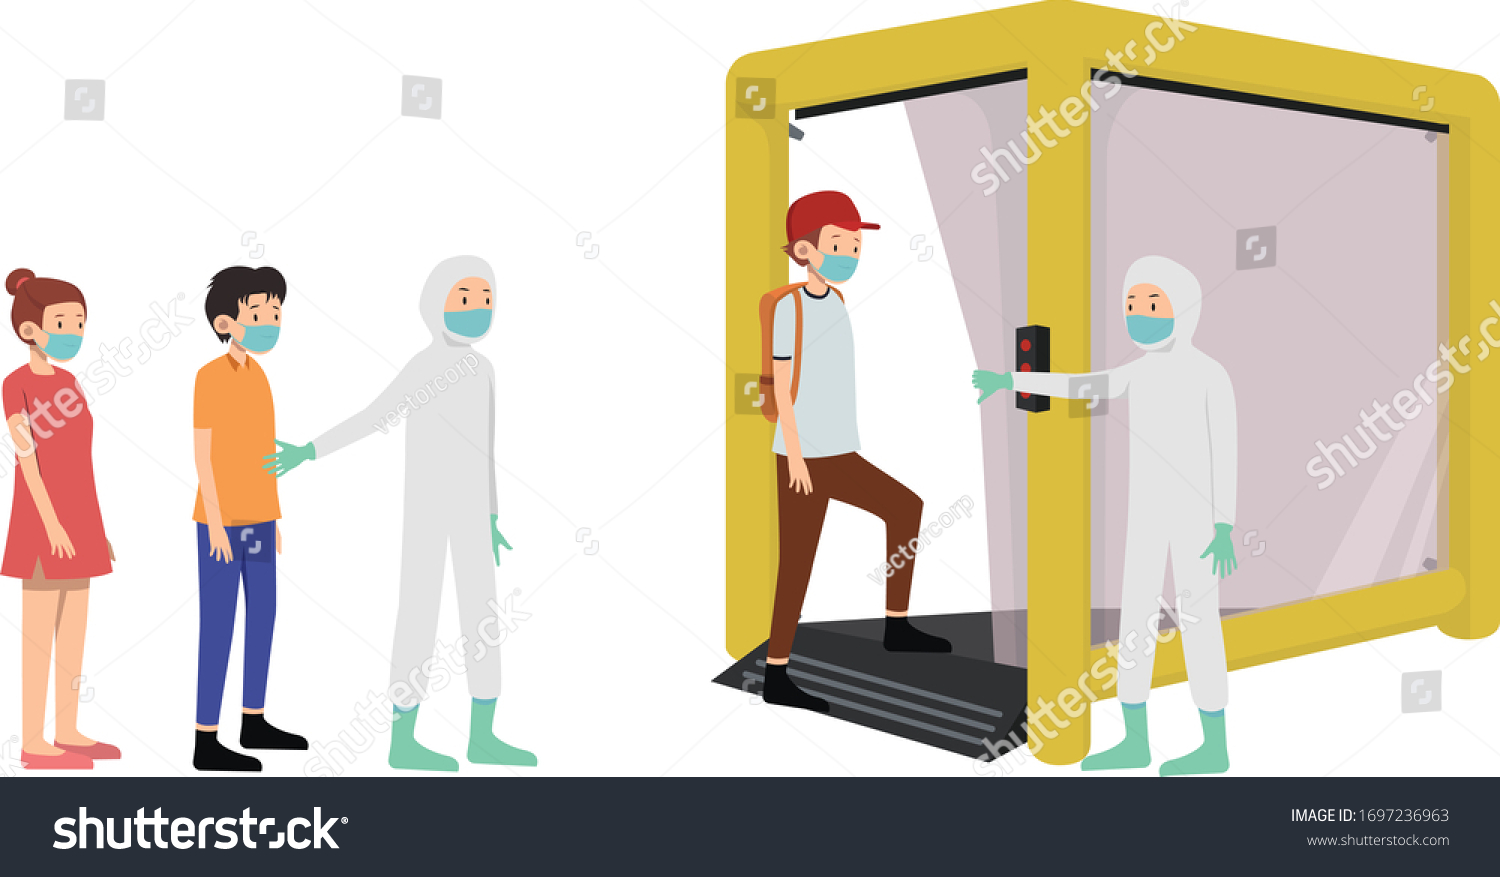 SVG of People do social distancing queue to get their body sterilized on decontamination chamber
 svg